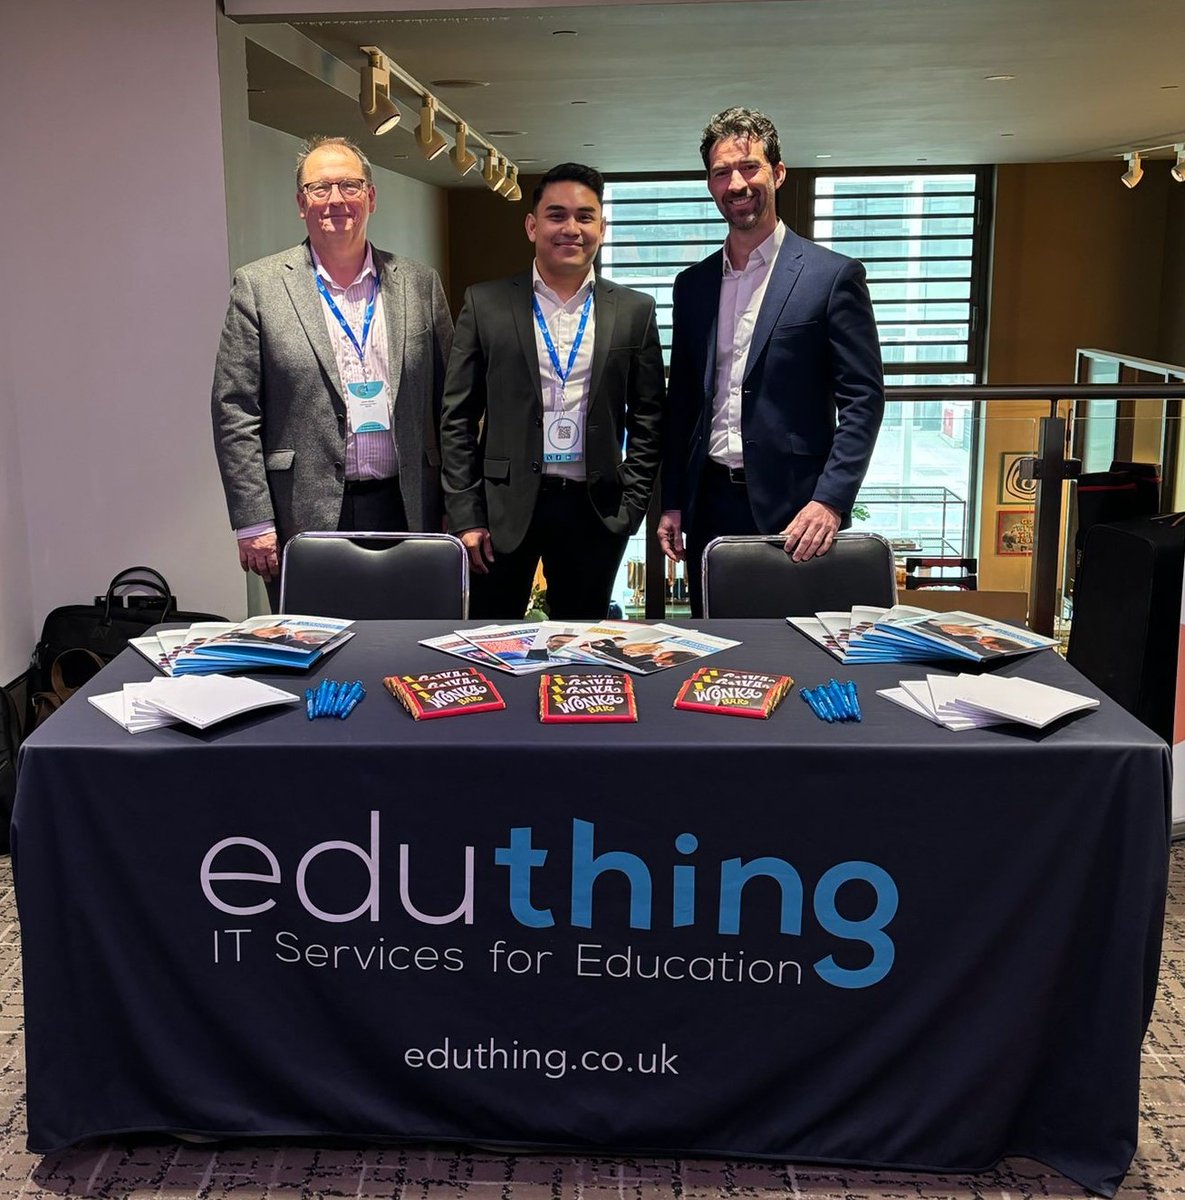 Last week a few members of team eduthing got scrubbed up to attend 'The National MAT Awards 2024' as very proud sponsors of the event. ⭐ We were honored to be part of such an insightful day. Big congratulations to all the winners. 🏆 @MatAssociation